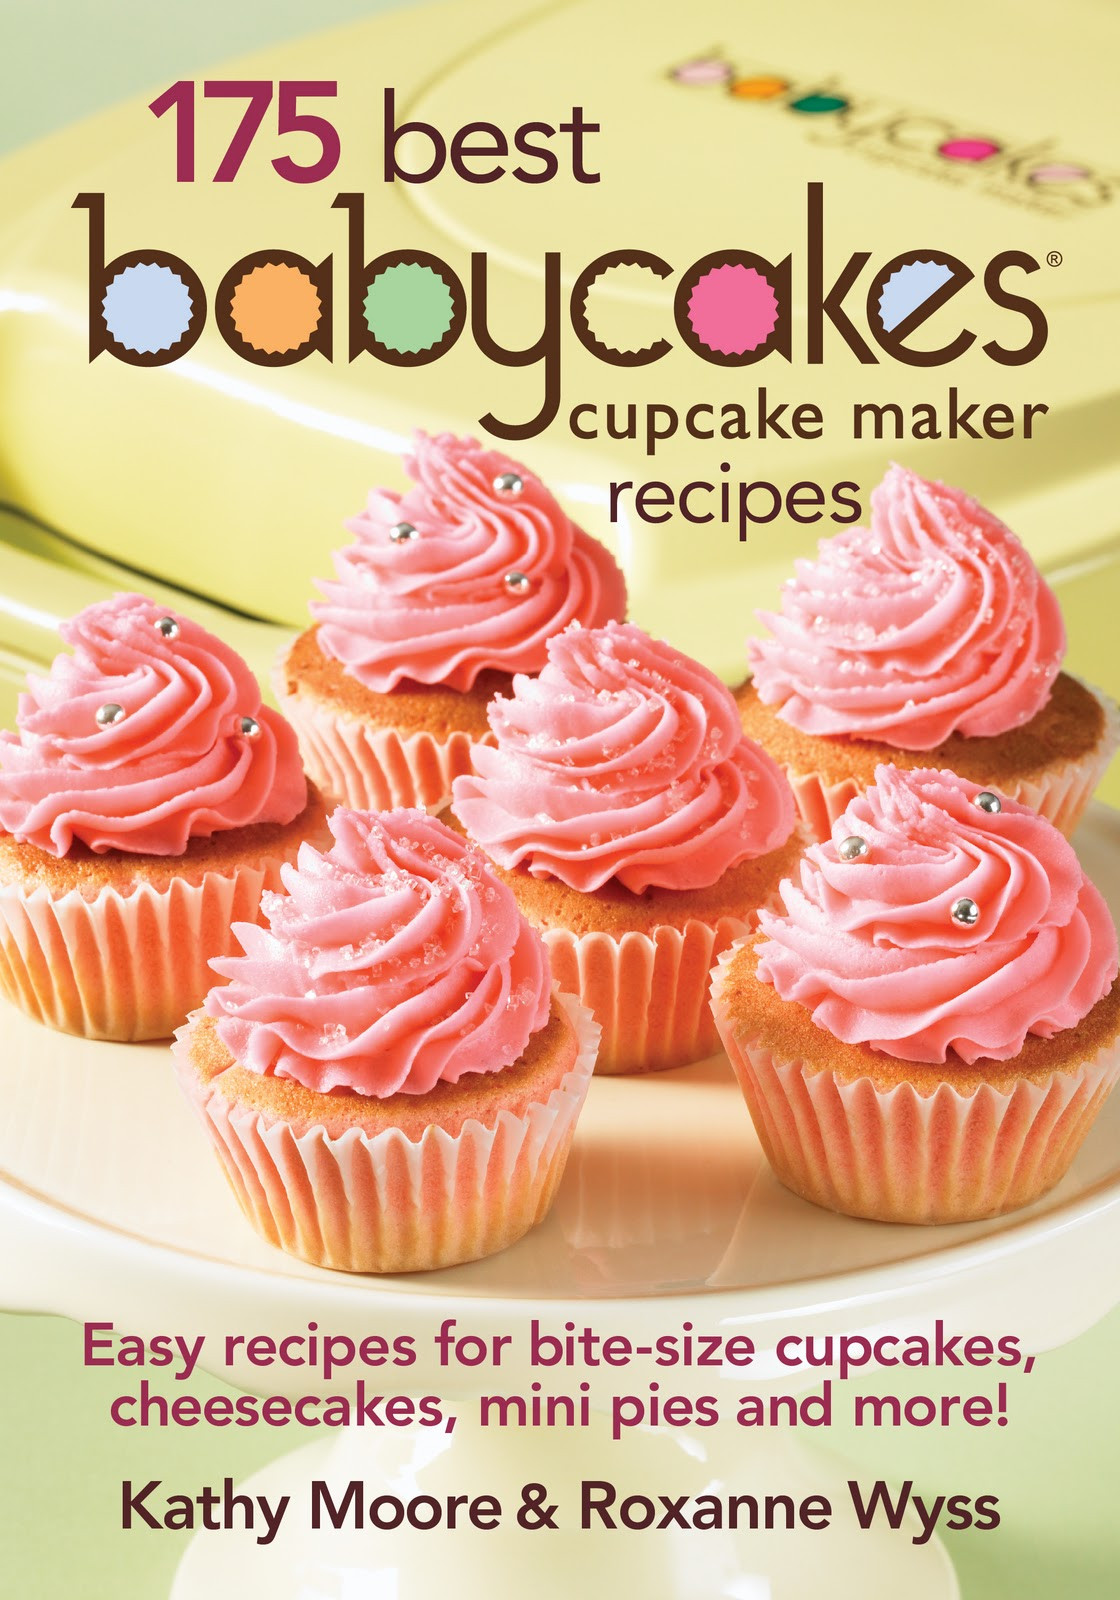 Baby Cakes Cupcakes Recipes
 Five Teens and a Babycakes Cupcake Maker Discover Finer